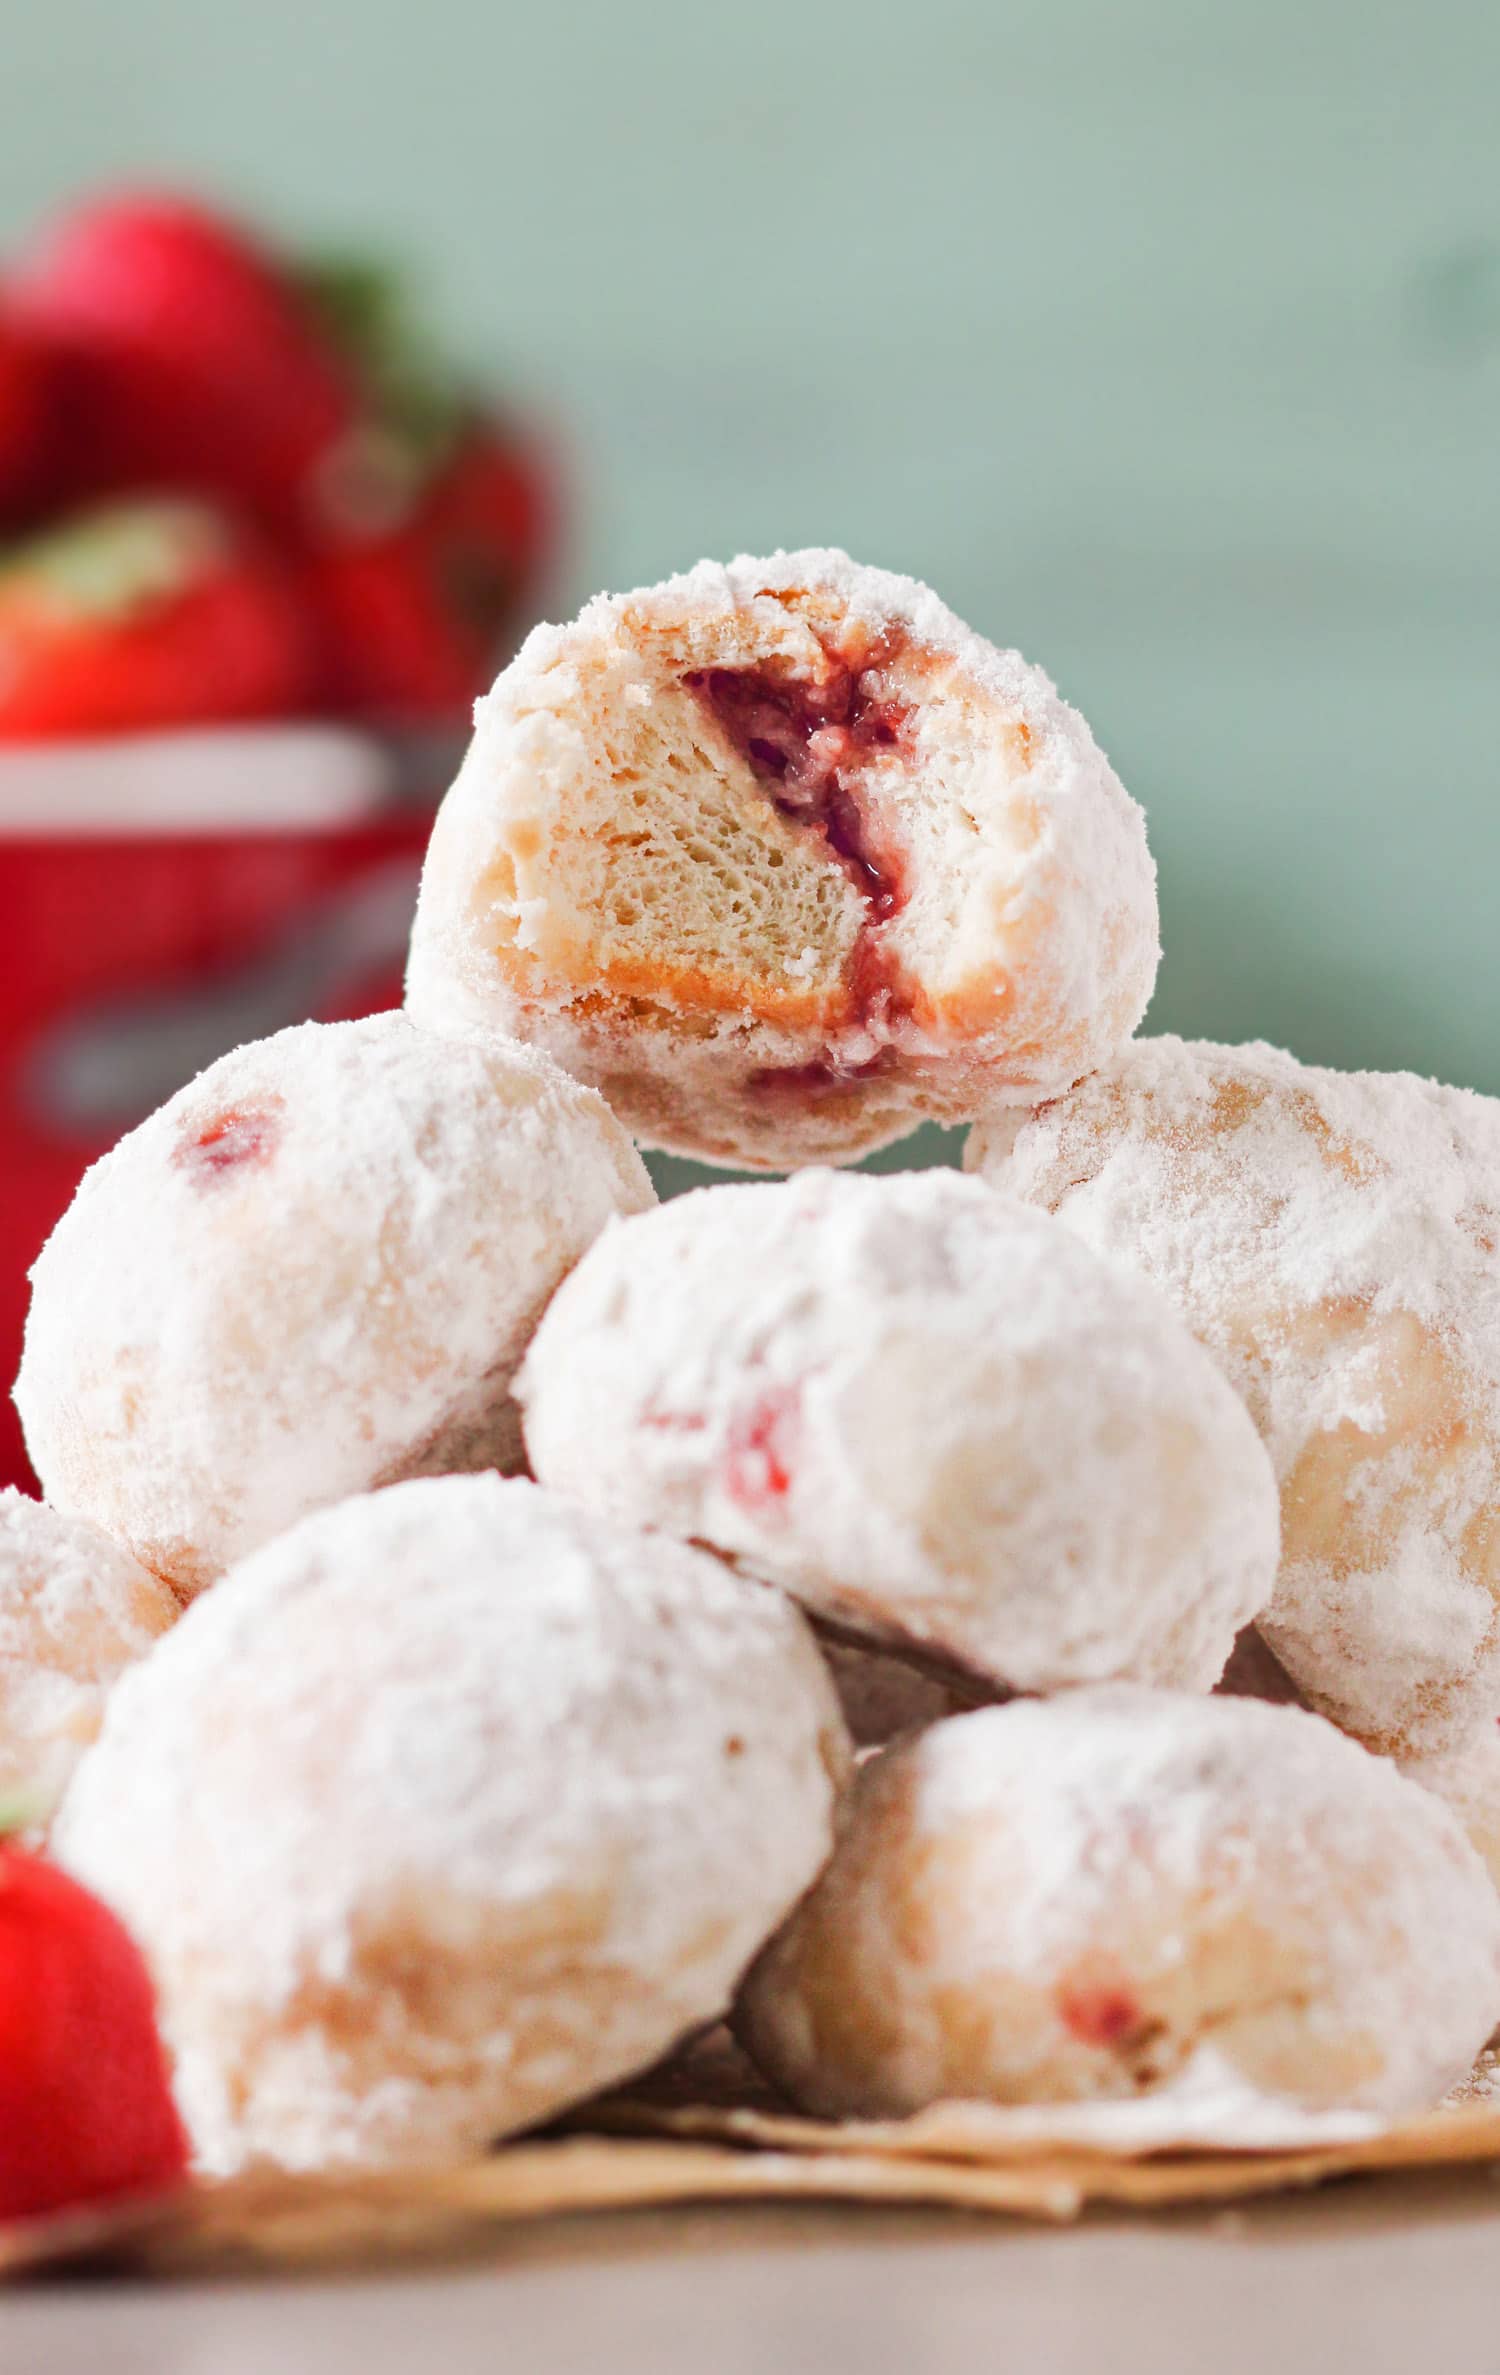 4-ingredient Guilt-Free Jelly-Filled Donut Holes Recipe (Baked, Not Fried!)